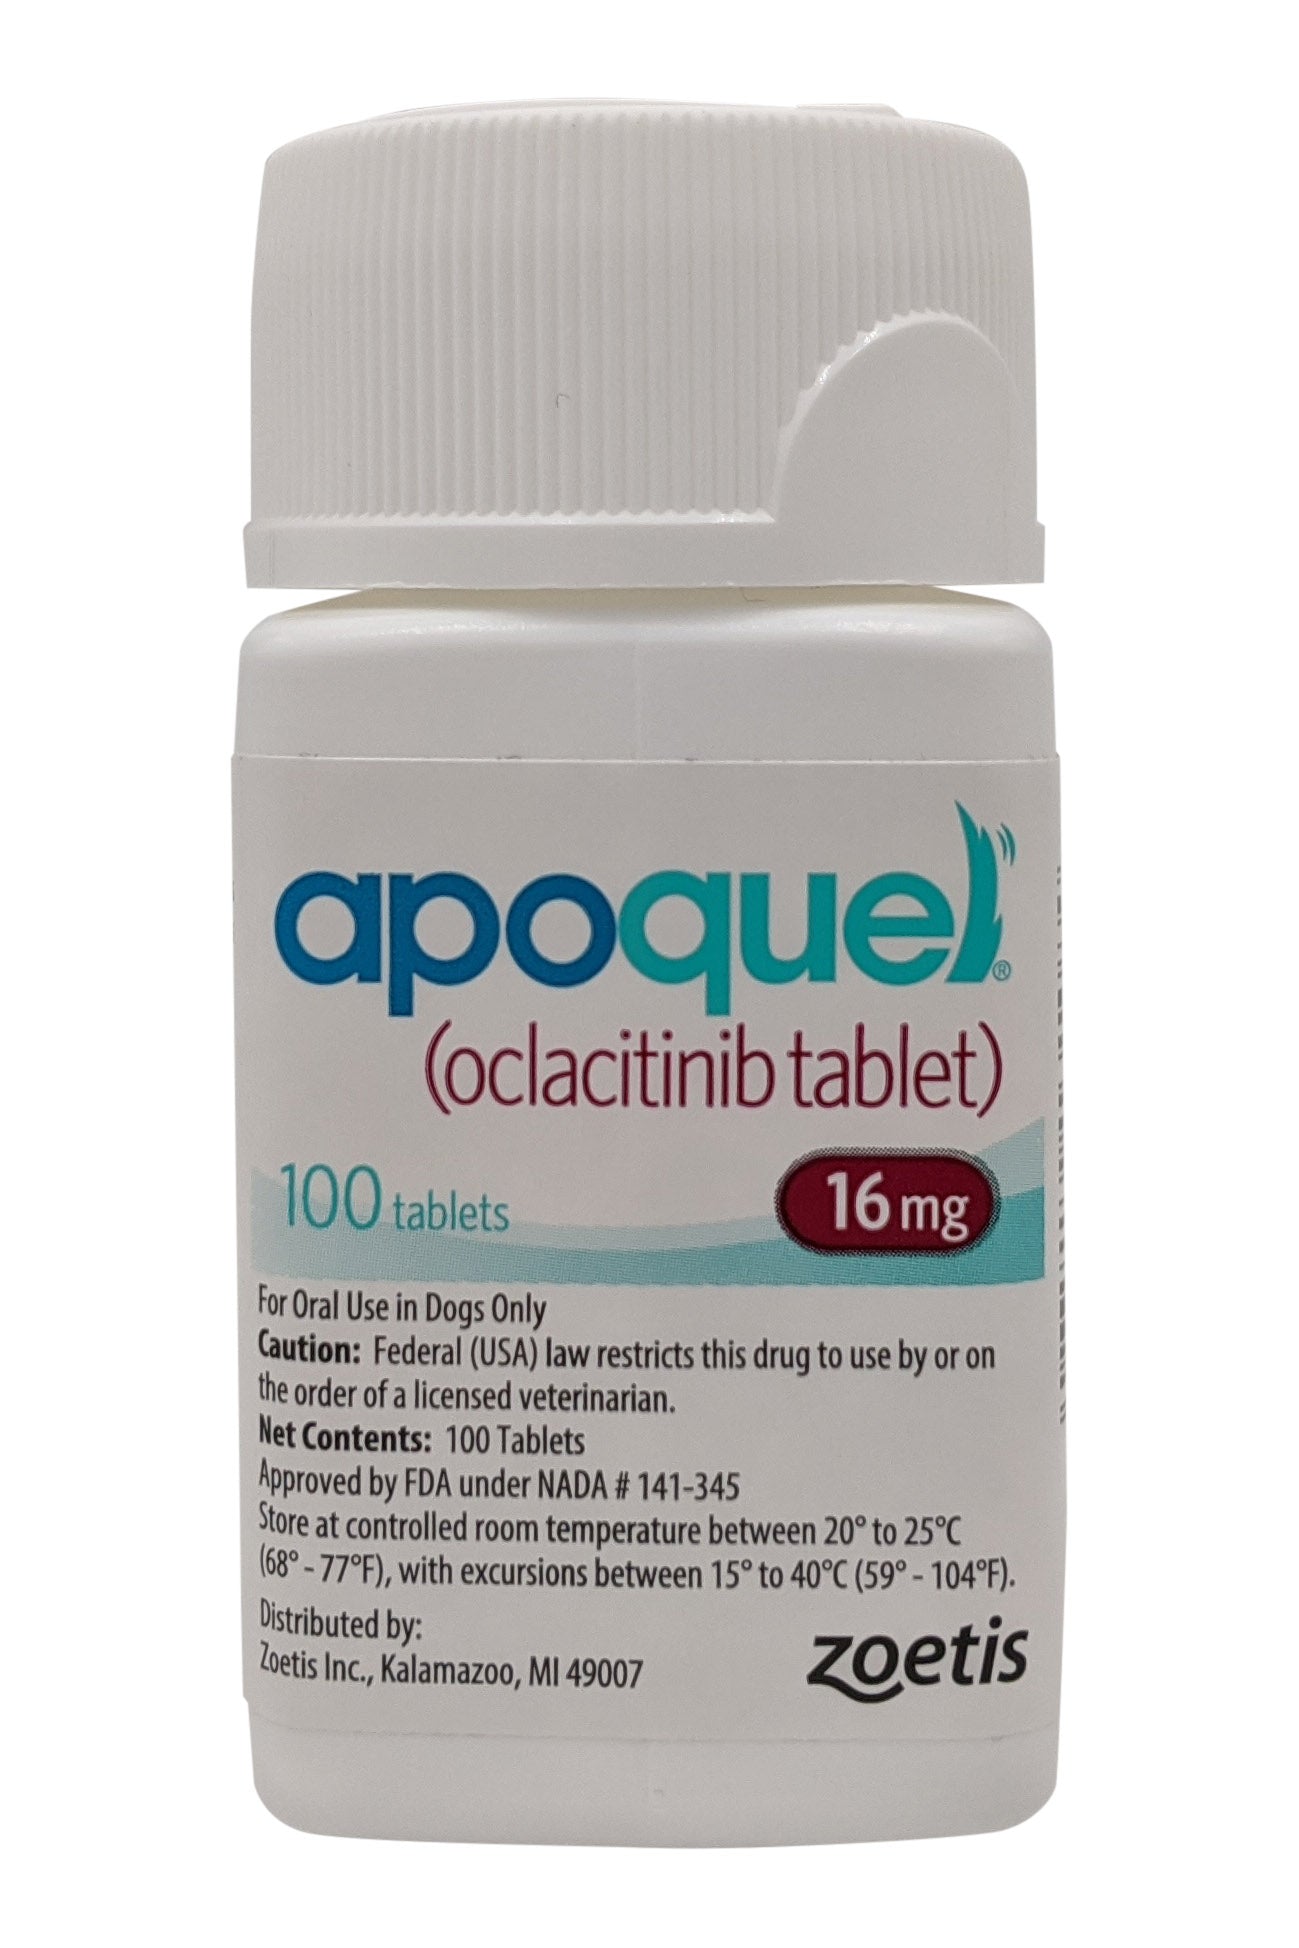 apoquel-itching-and-skin-inflammation-in-dogs-vetrxdirect-sites-unimi-it